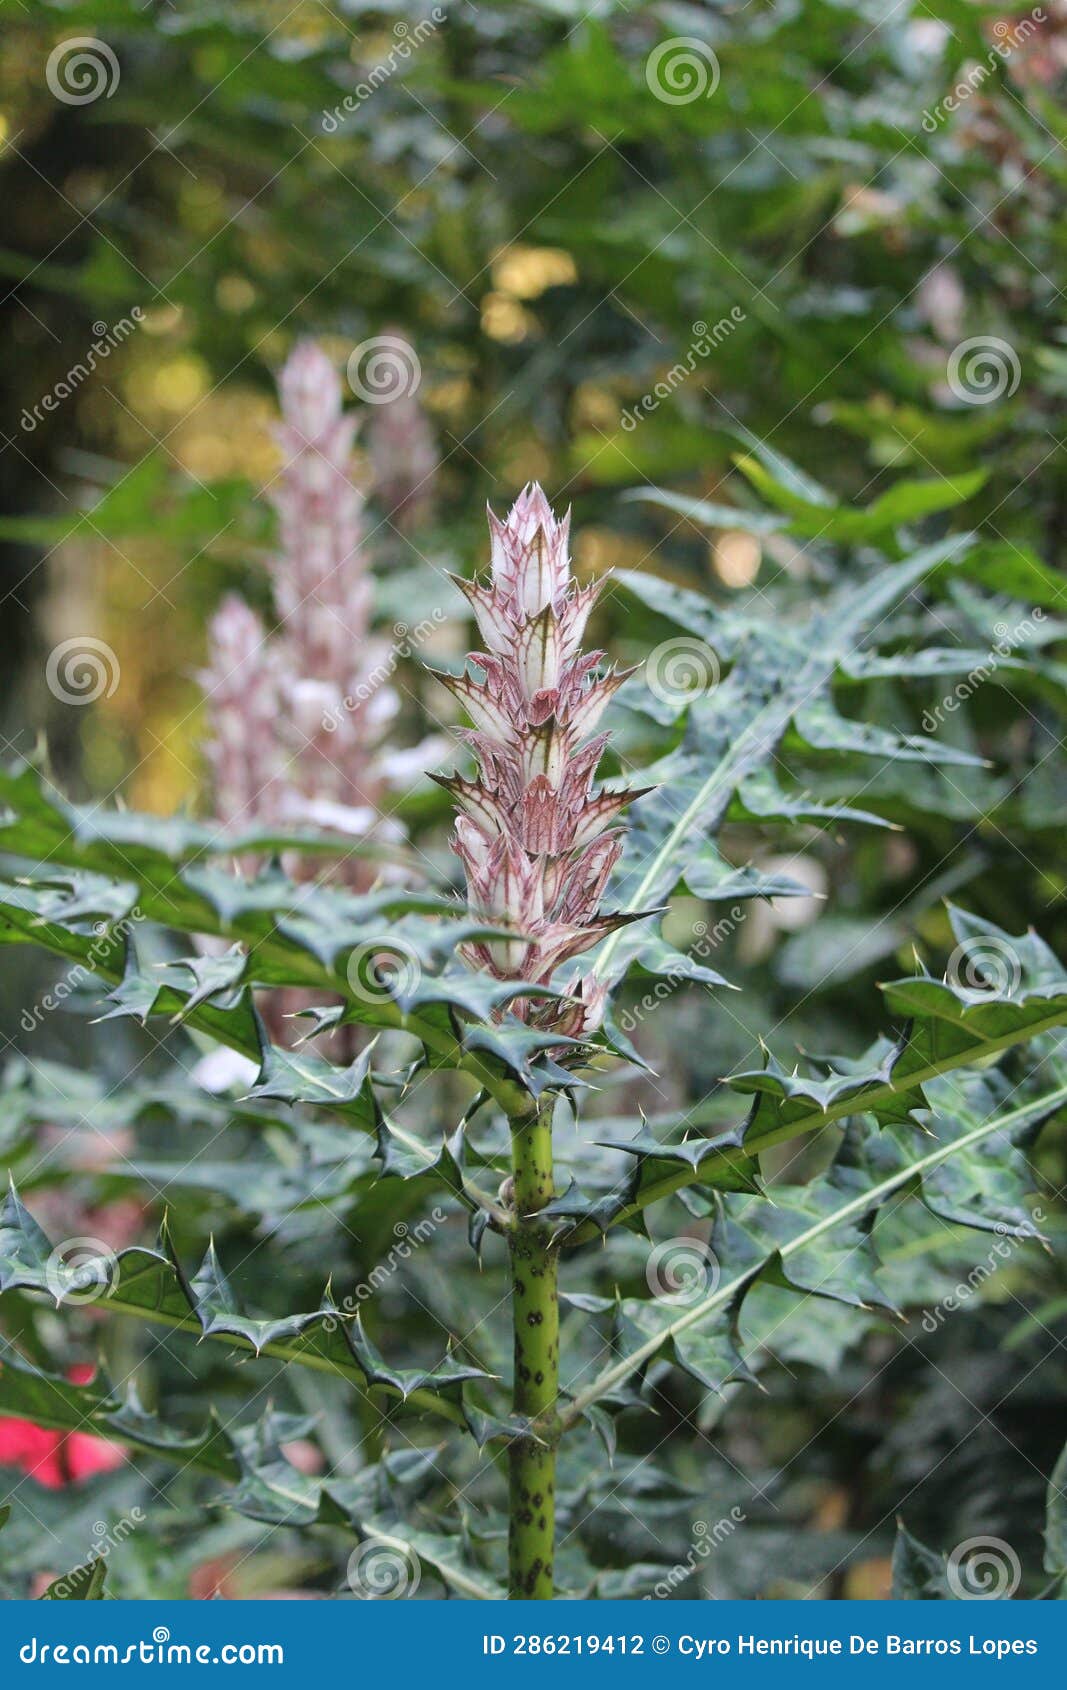 mountain thistle details background photo, bear's breech, acanthus montanus, african species, introduced ornamental species